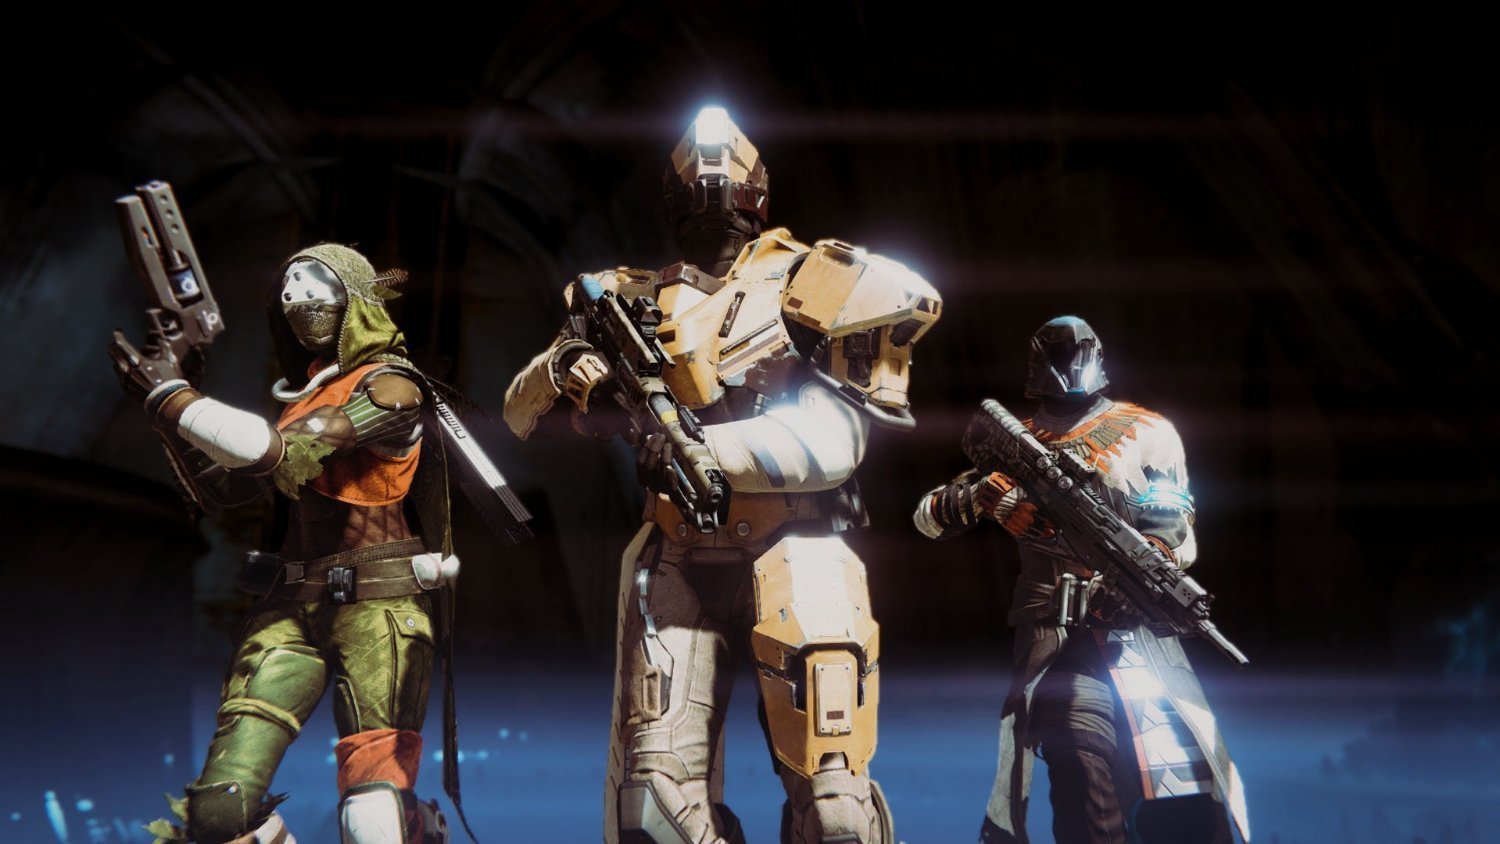 If you have Destiny: The Taken King problems, you need to tell Bungie about them.